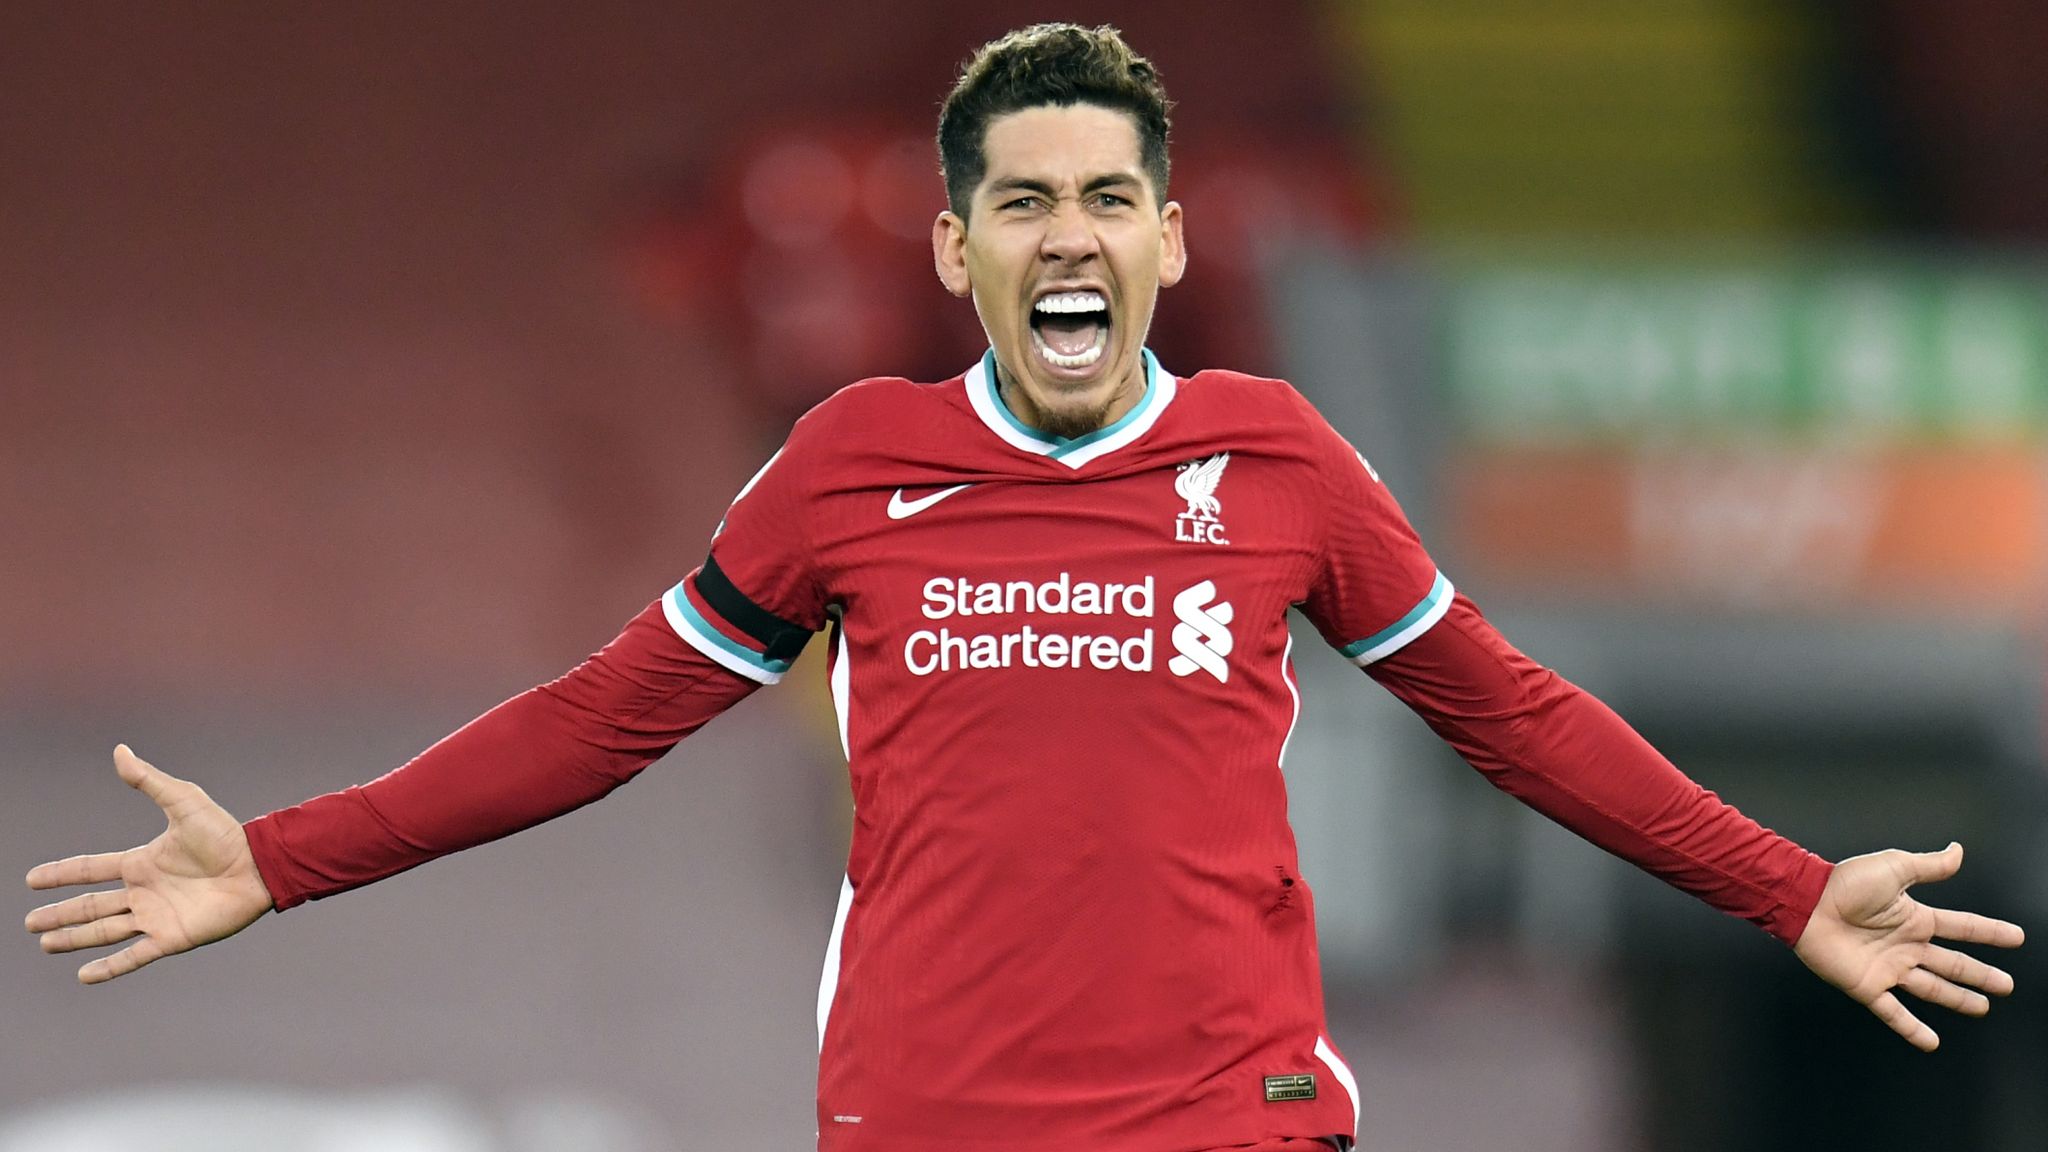 Roberto Firmino age, salary and net worth in 2022, girlfriend, facts, football Career